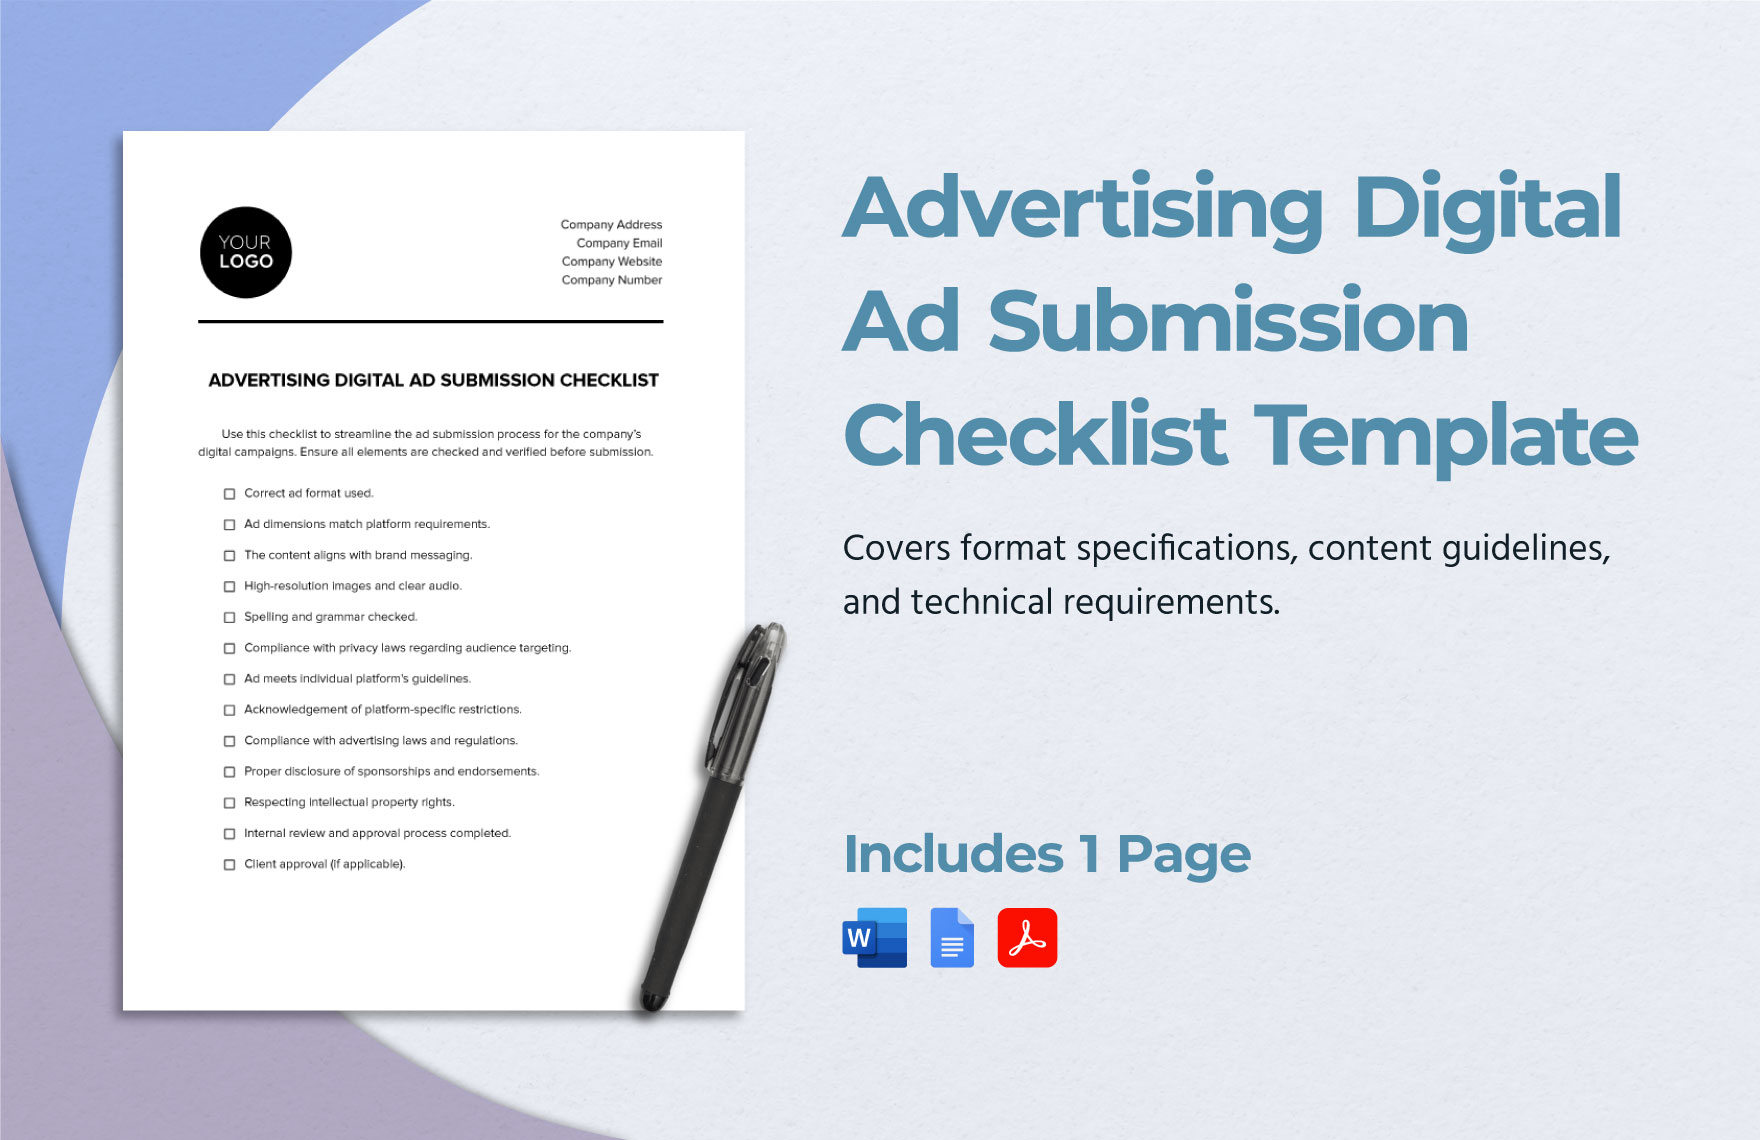 Advertising Digital Ad Submission Checklist Template in Word, Google Docs, PDF